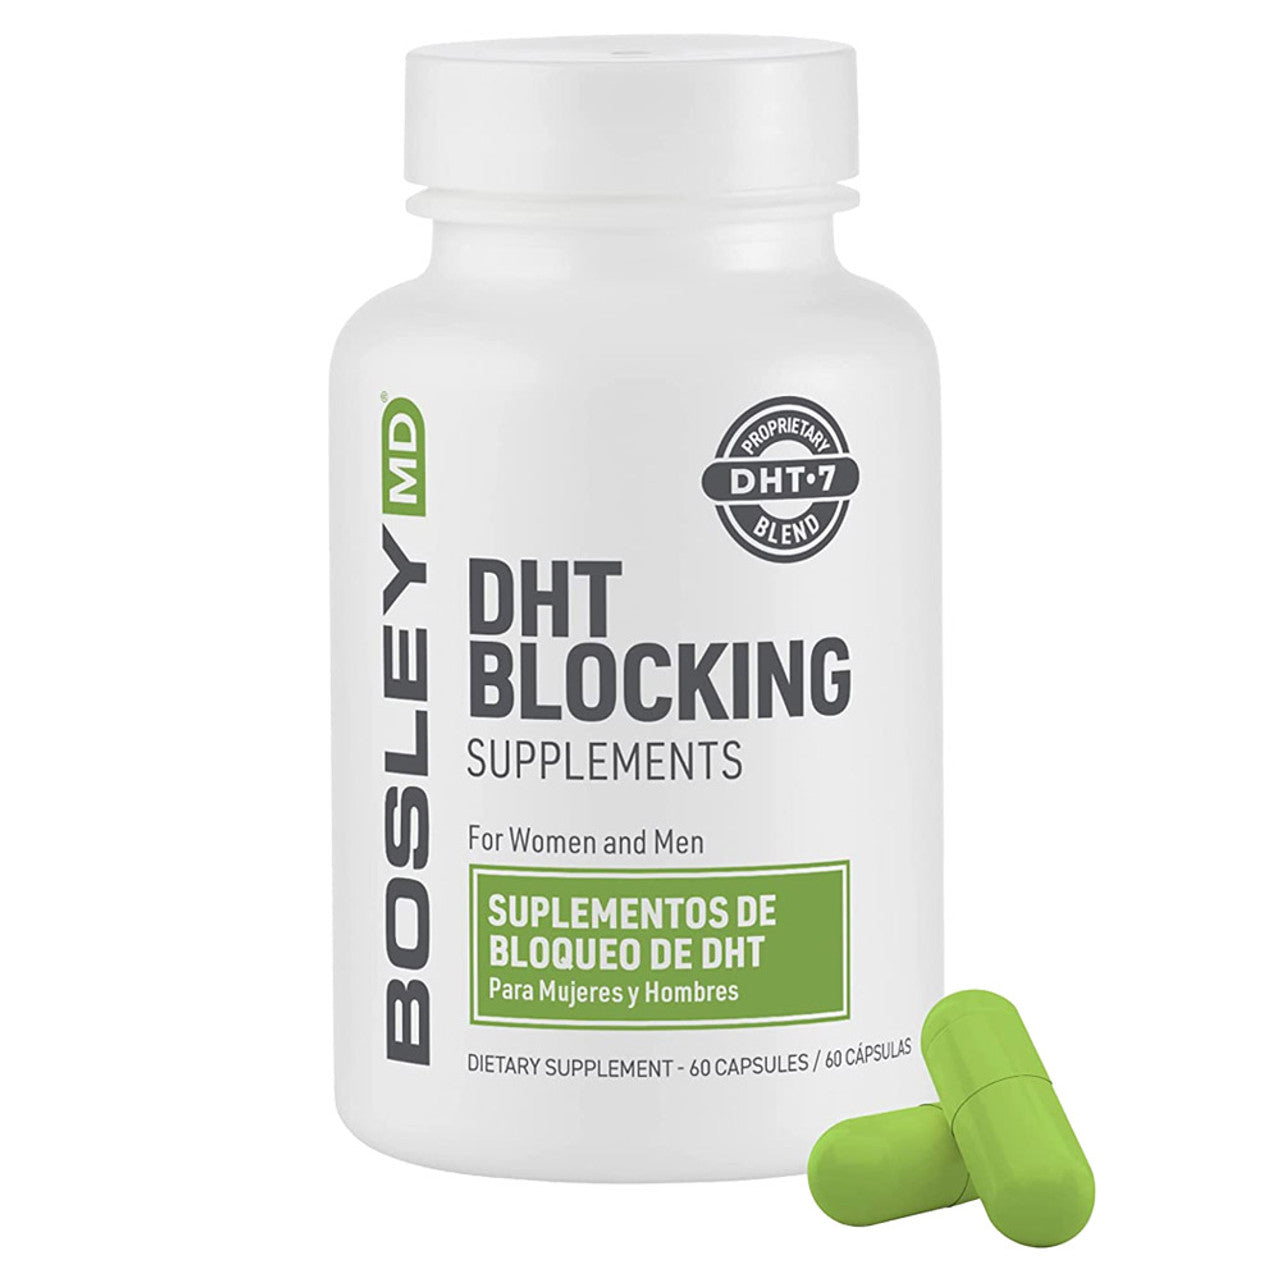 Bosley DHT Blocking Supplements 60capsules for Women and Men